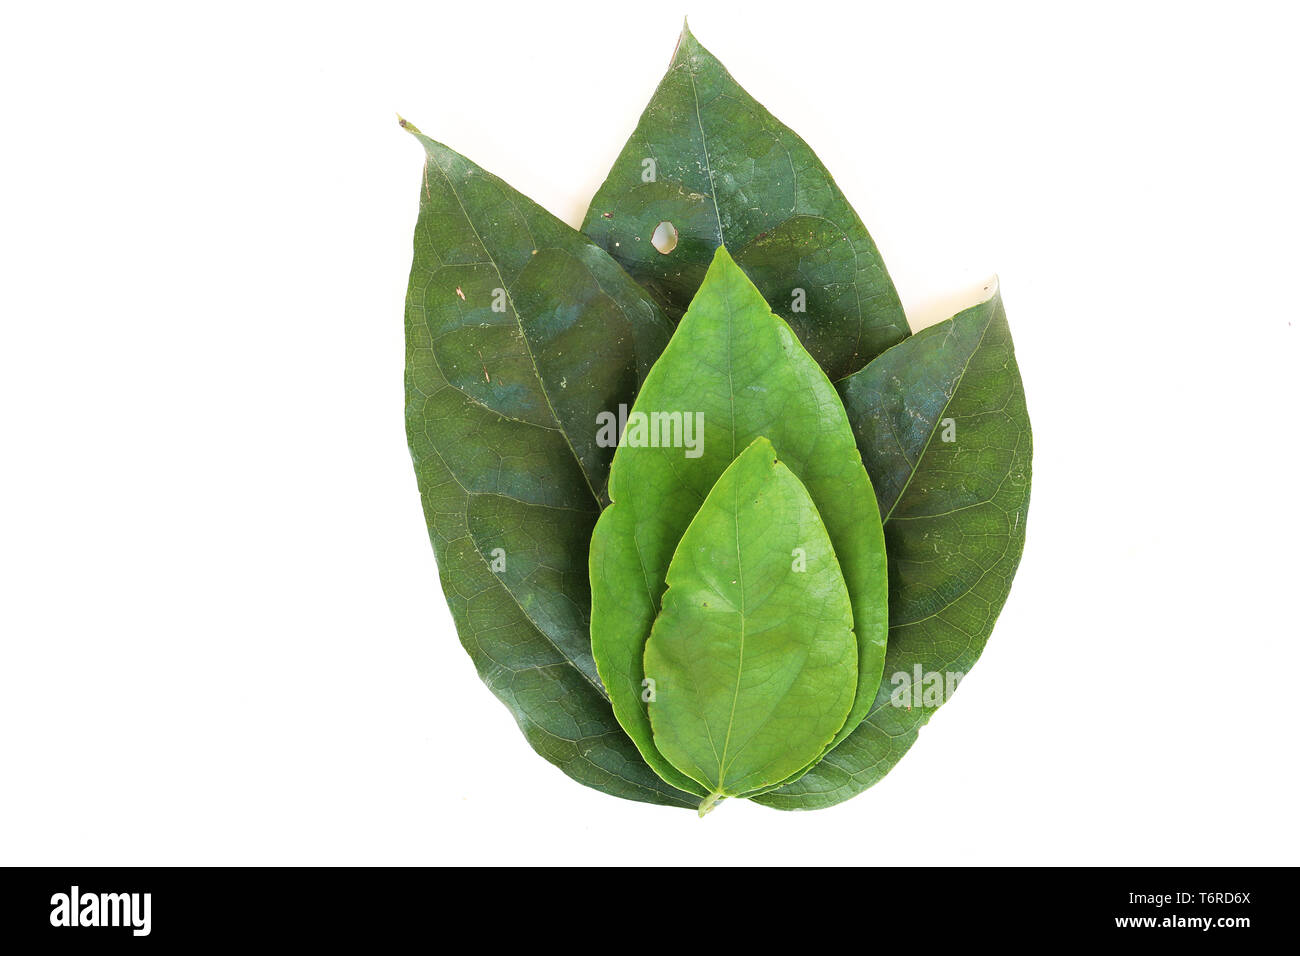 Tiliacora triandra Fresh Bamboo grass or Bai Ya Nang Leaves (Colebr.) Diels)  concept Herbal and Vegetable extracts are medications for treating diabe Stock Photo